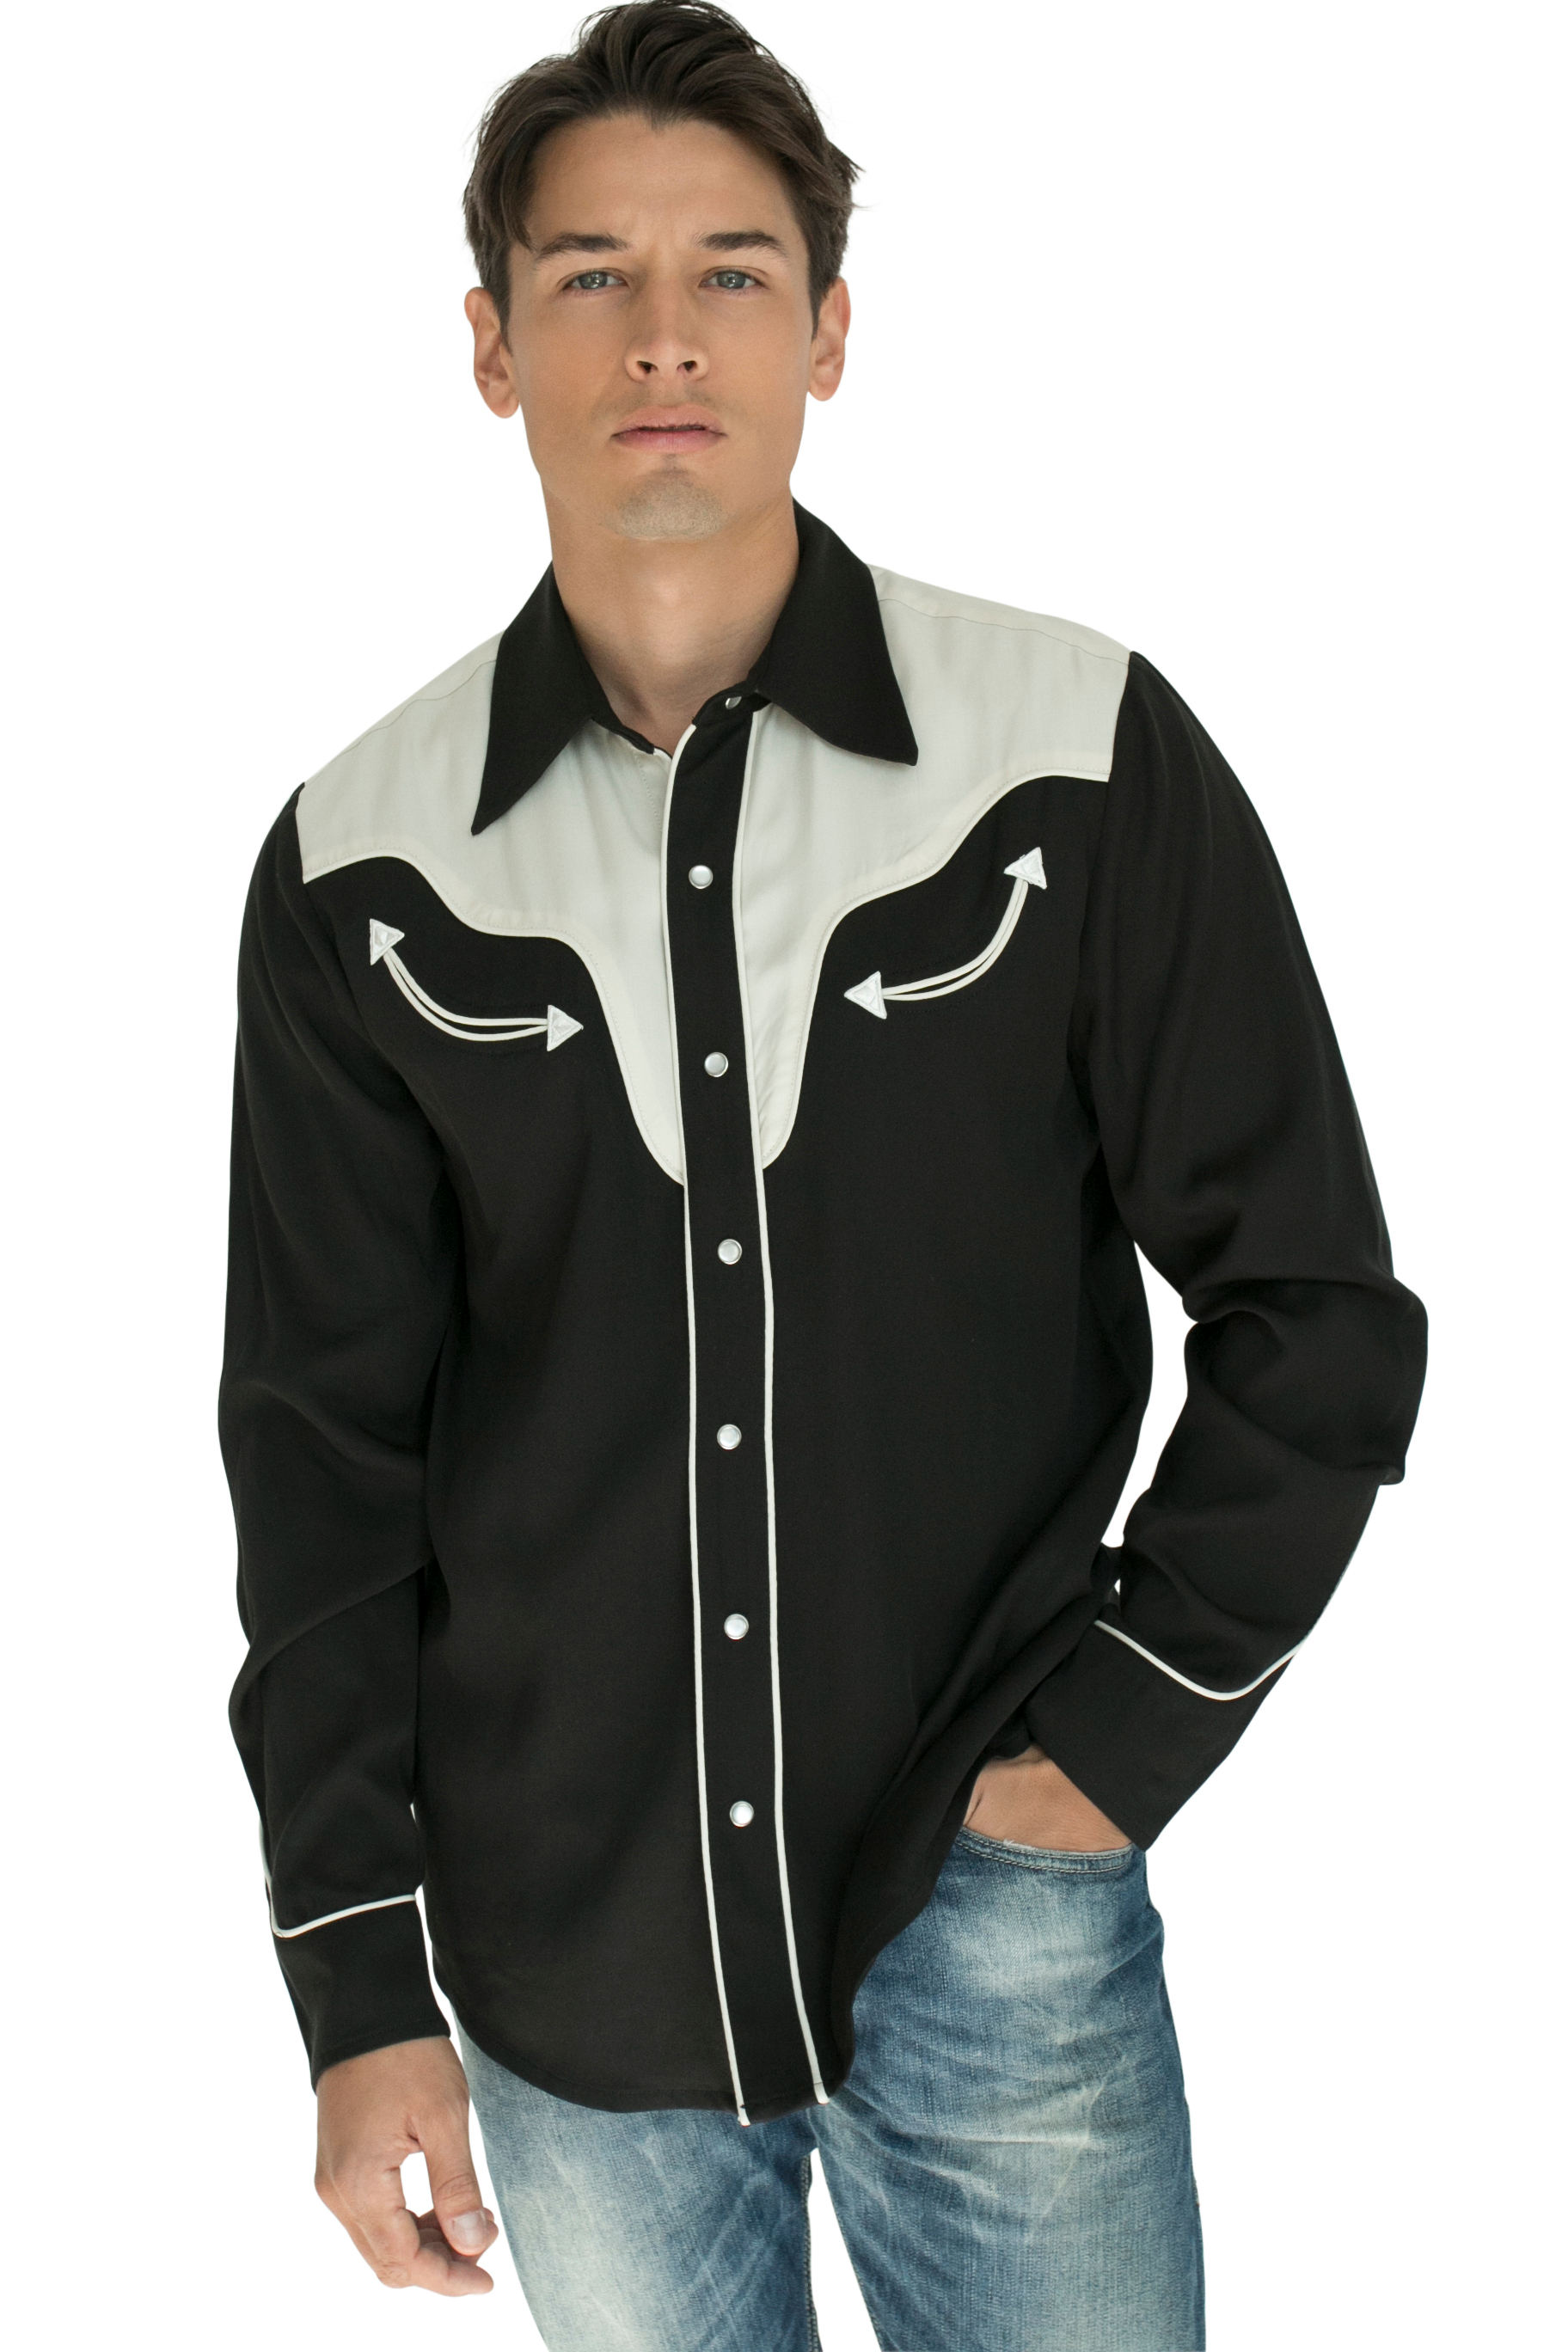 H Bar C Western Casual Shirts for Men